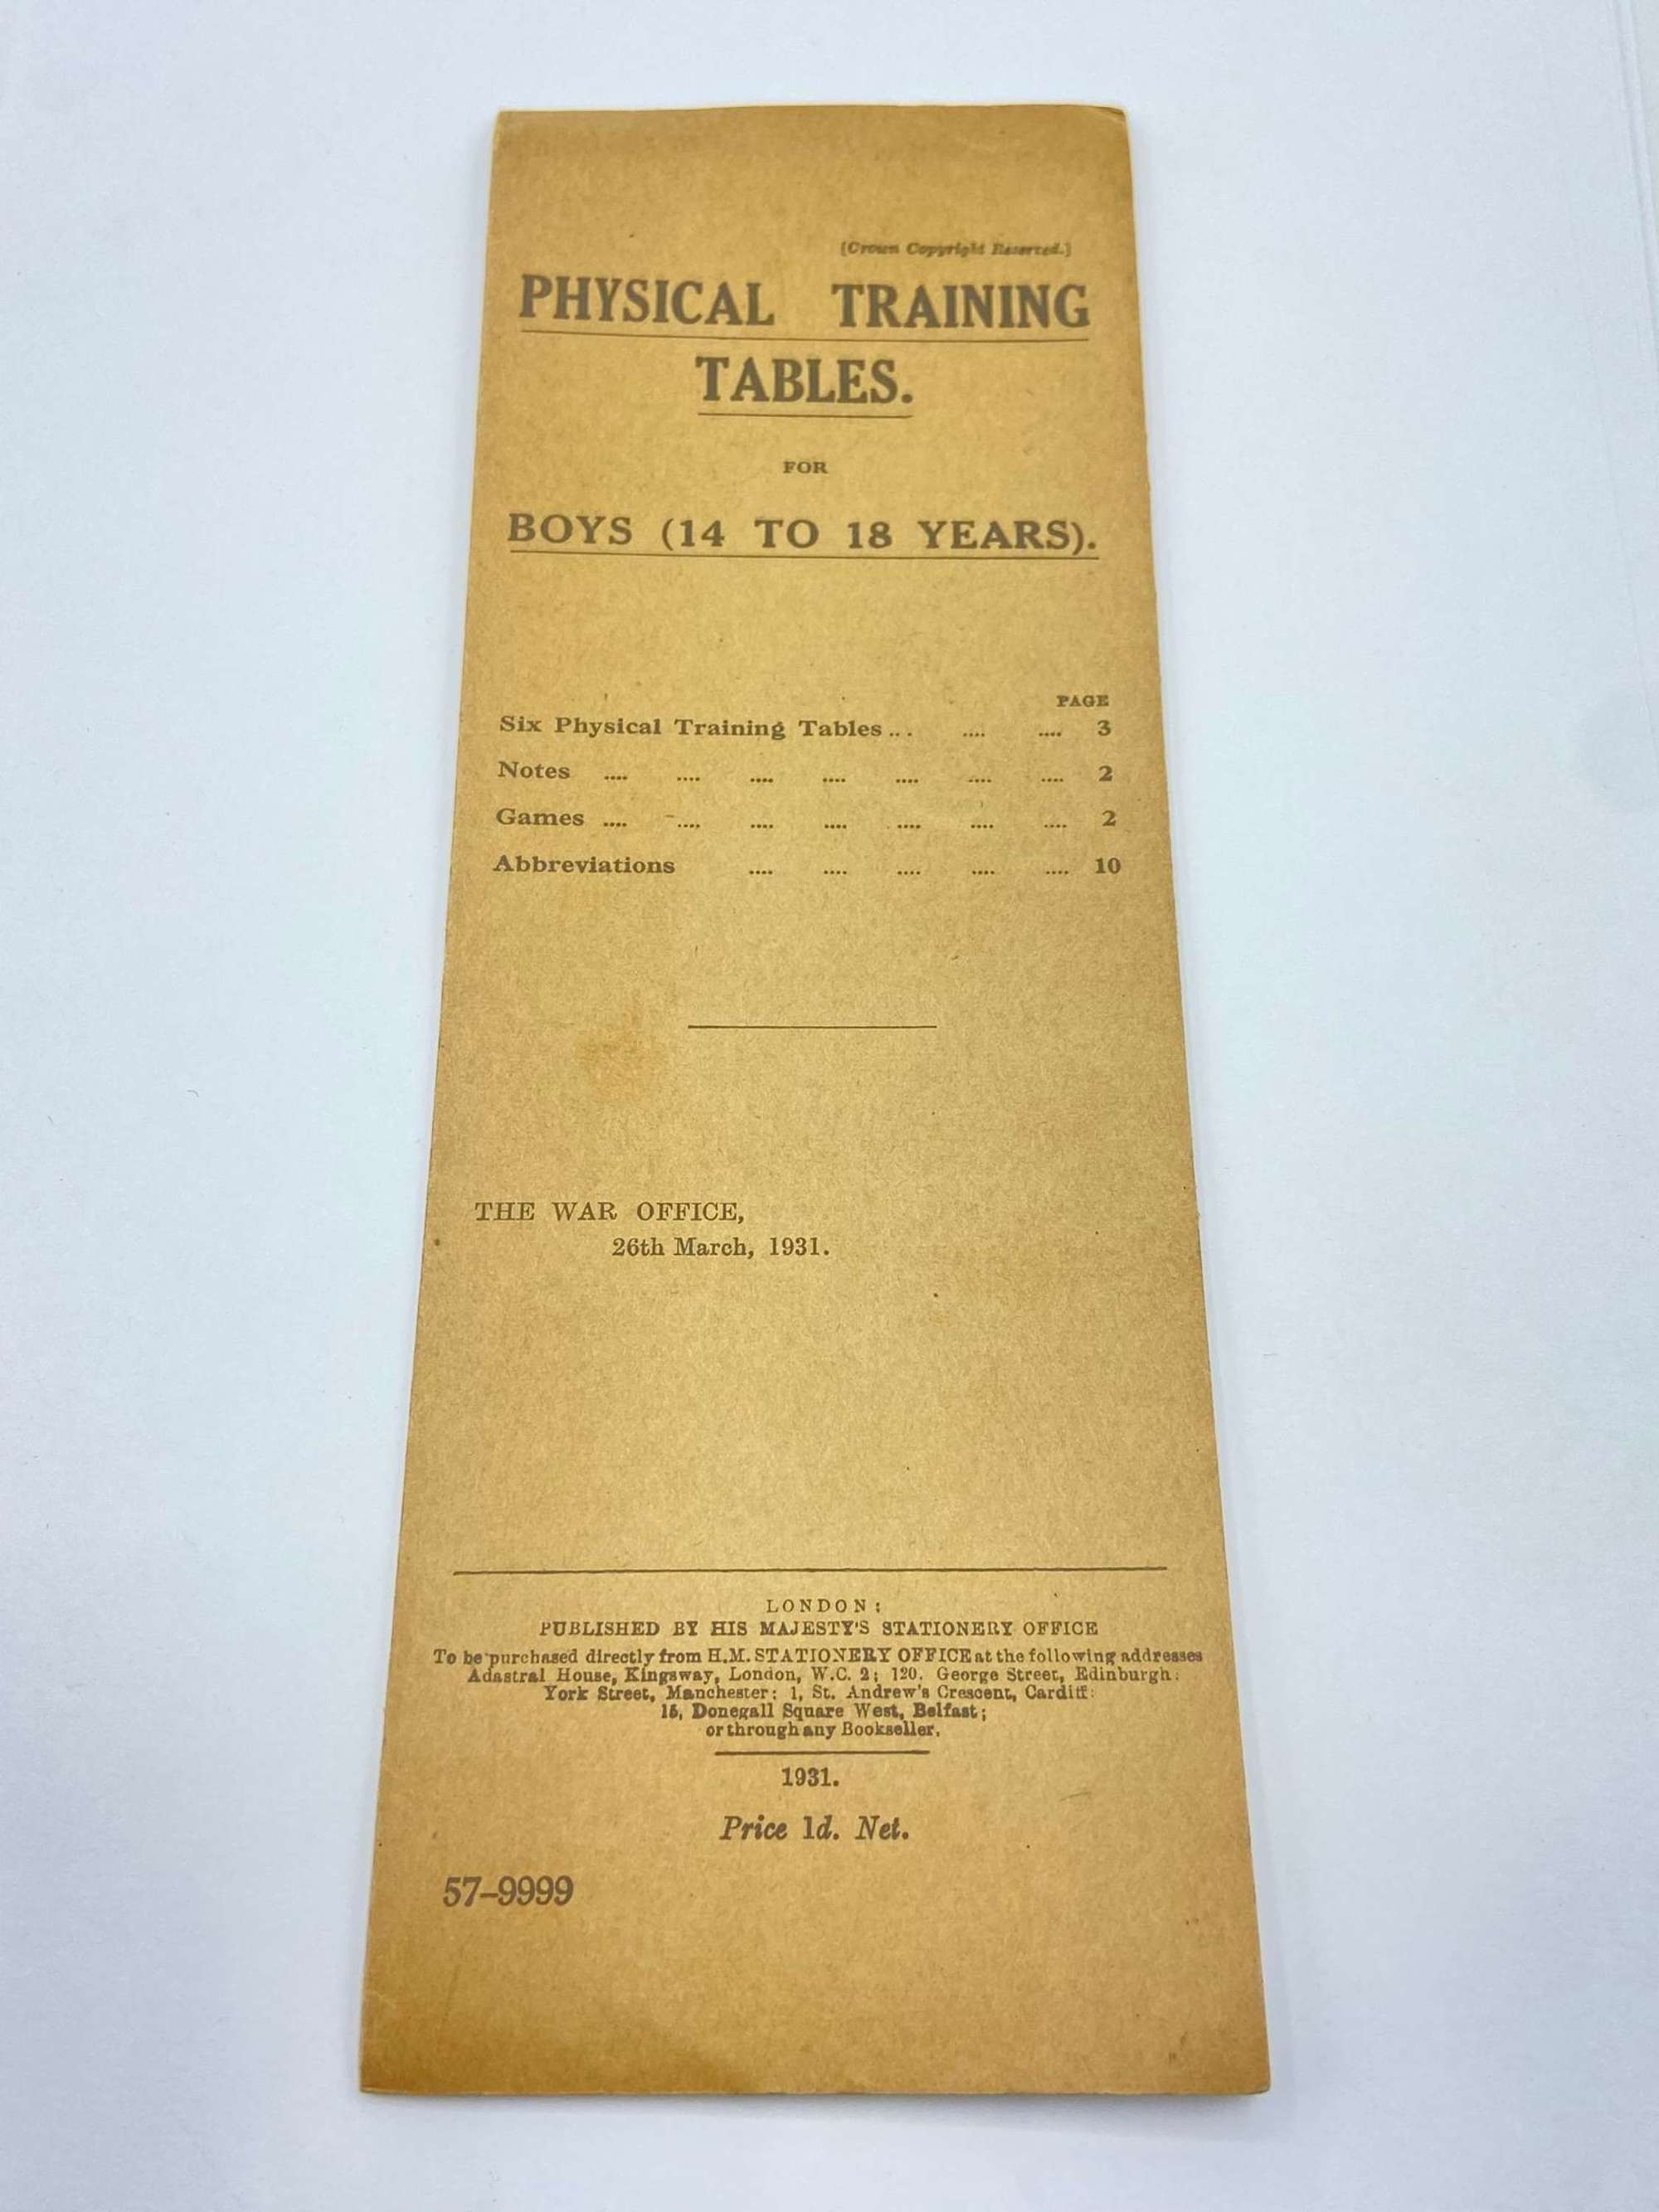 WW2 British Army Physical Training Tables For Boys 14 to 18 Years